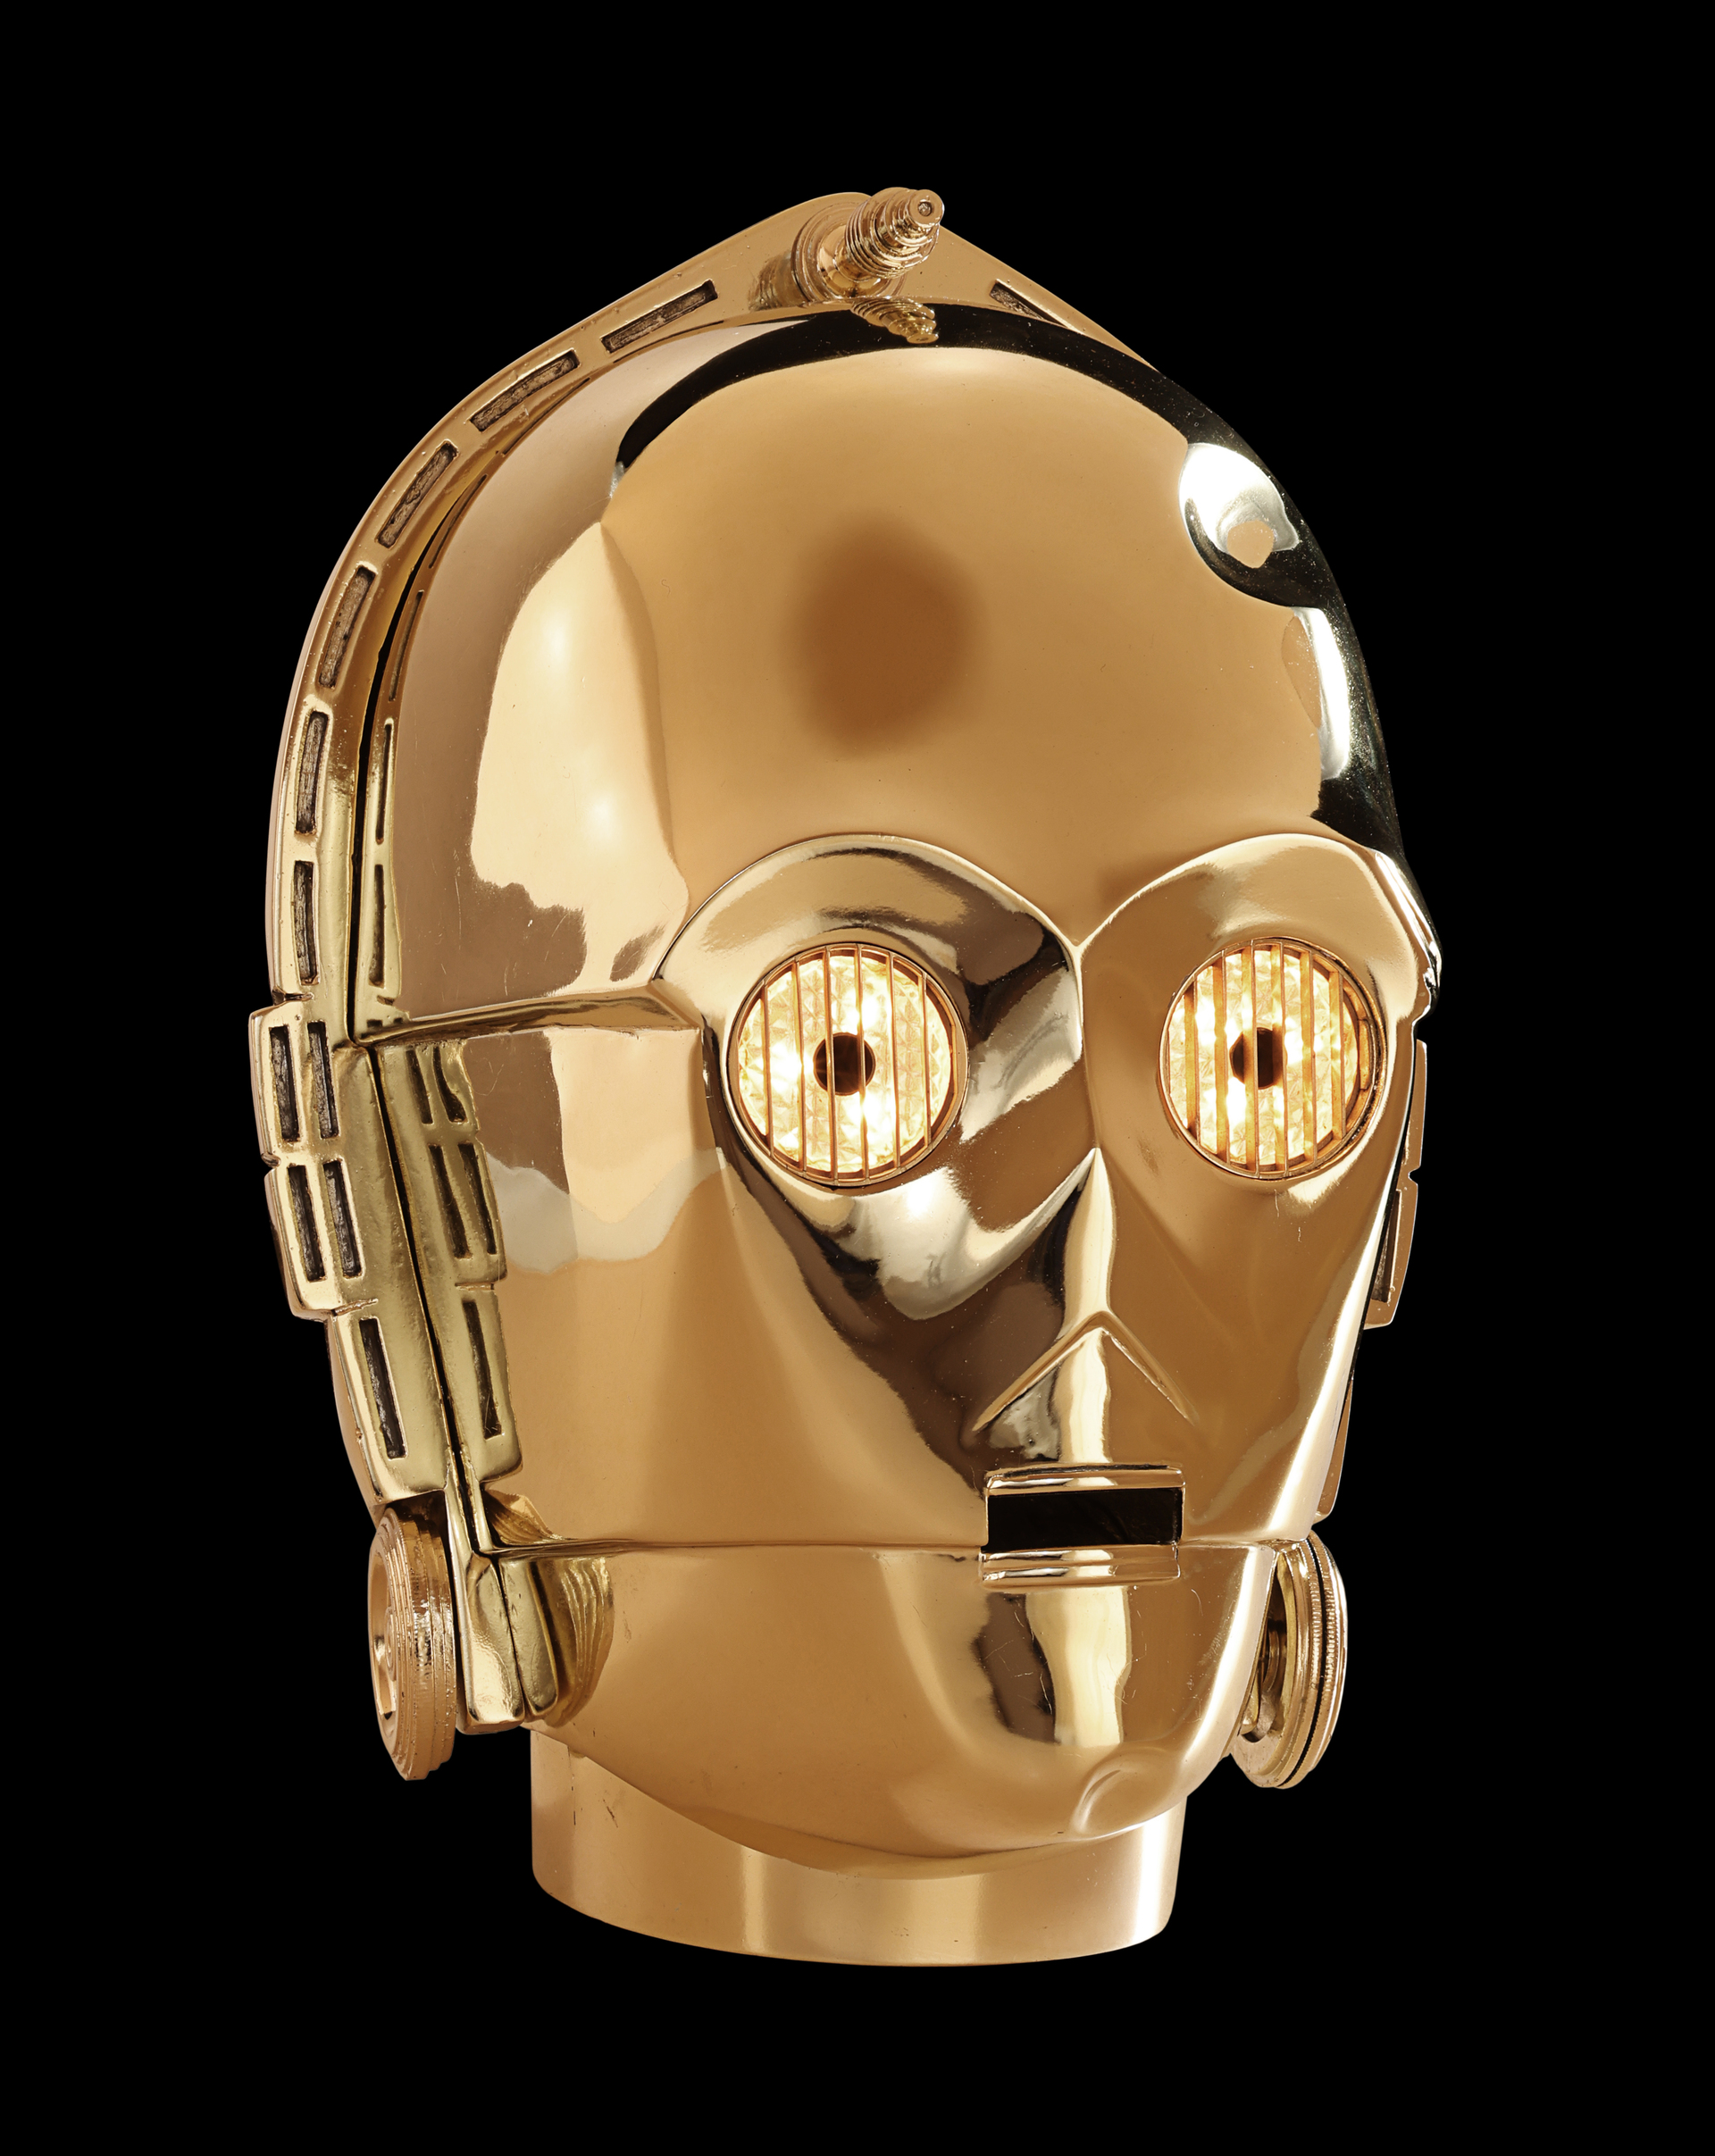 STAR WARS: A NEW HOPE (1977) - Anthony Daniels Collection: Screen-matched Light-up C-3PO (Anthony Da